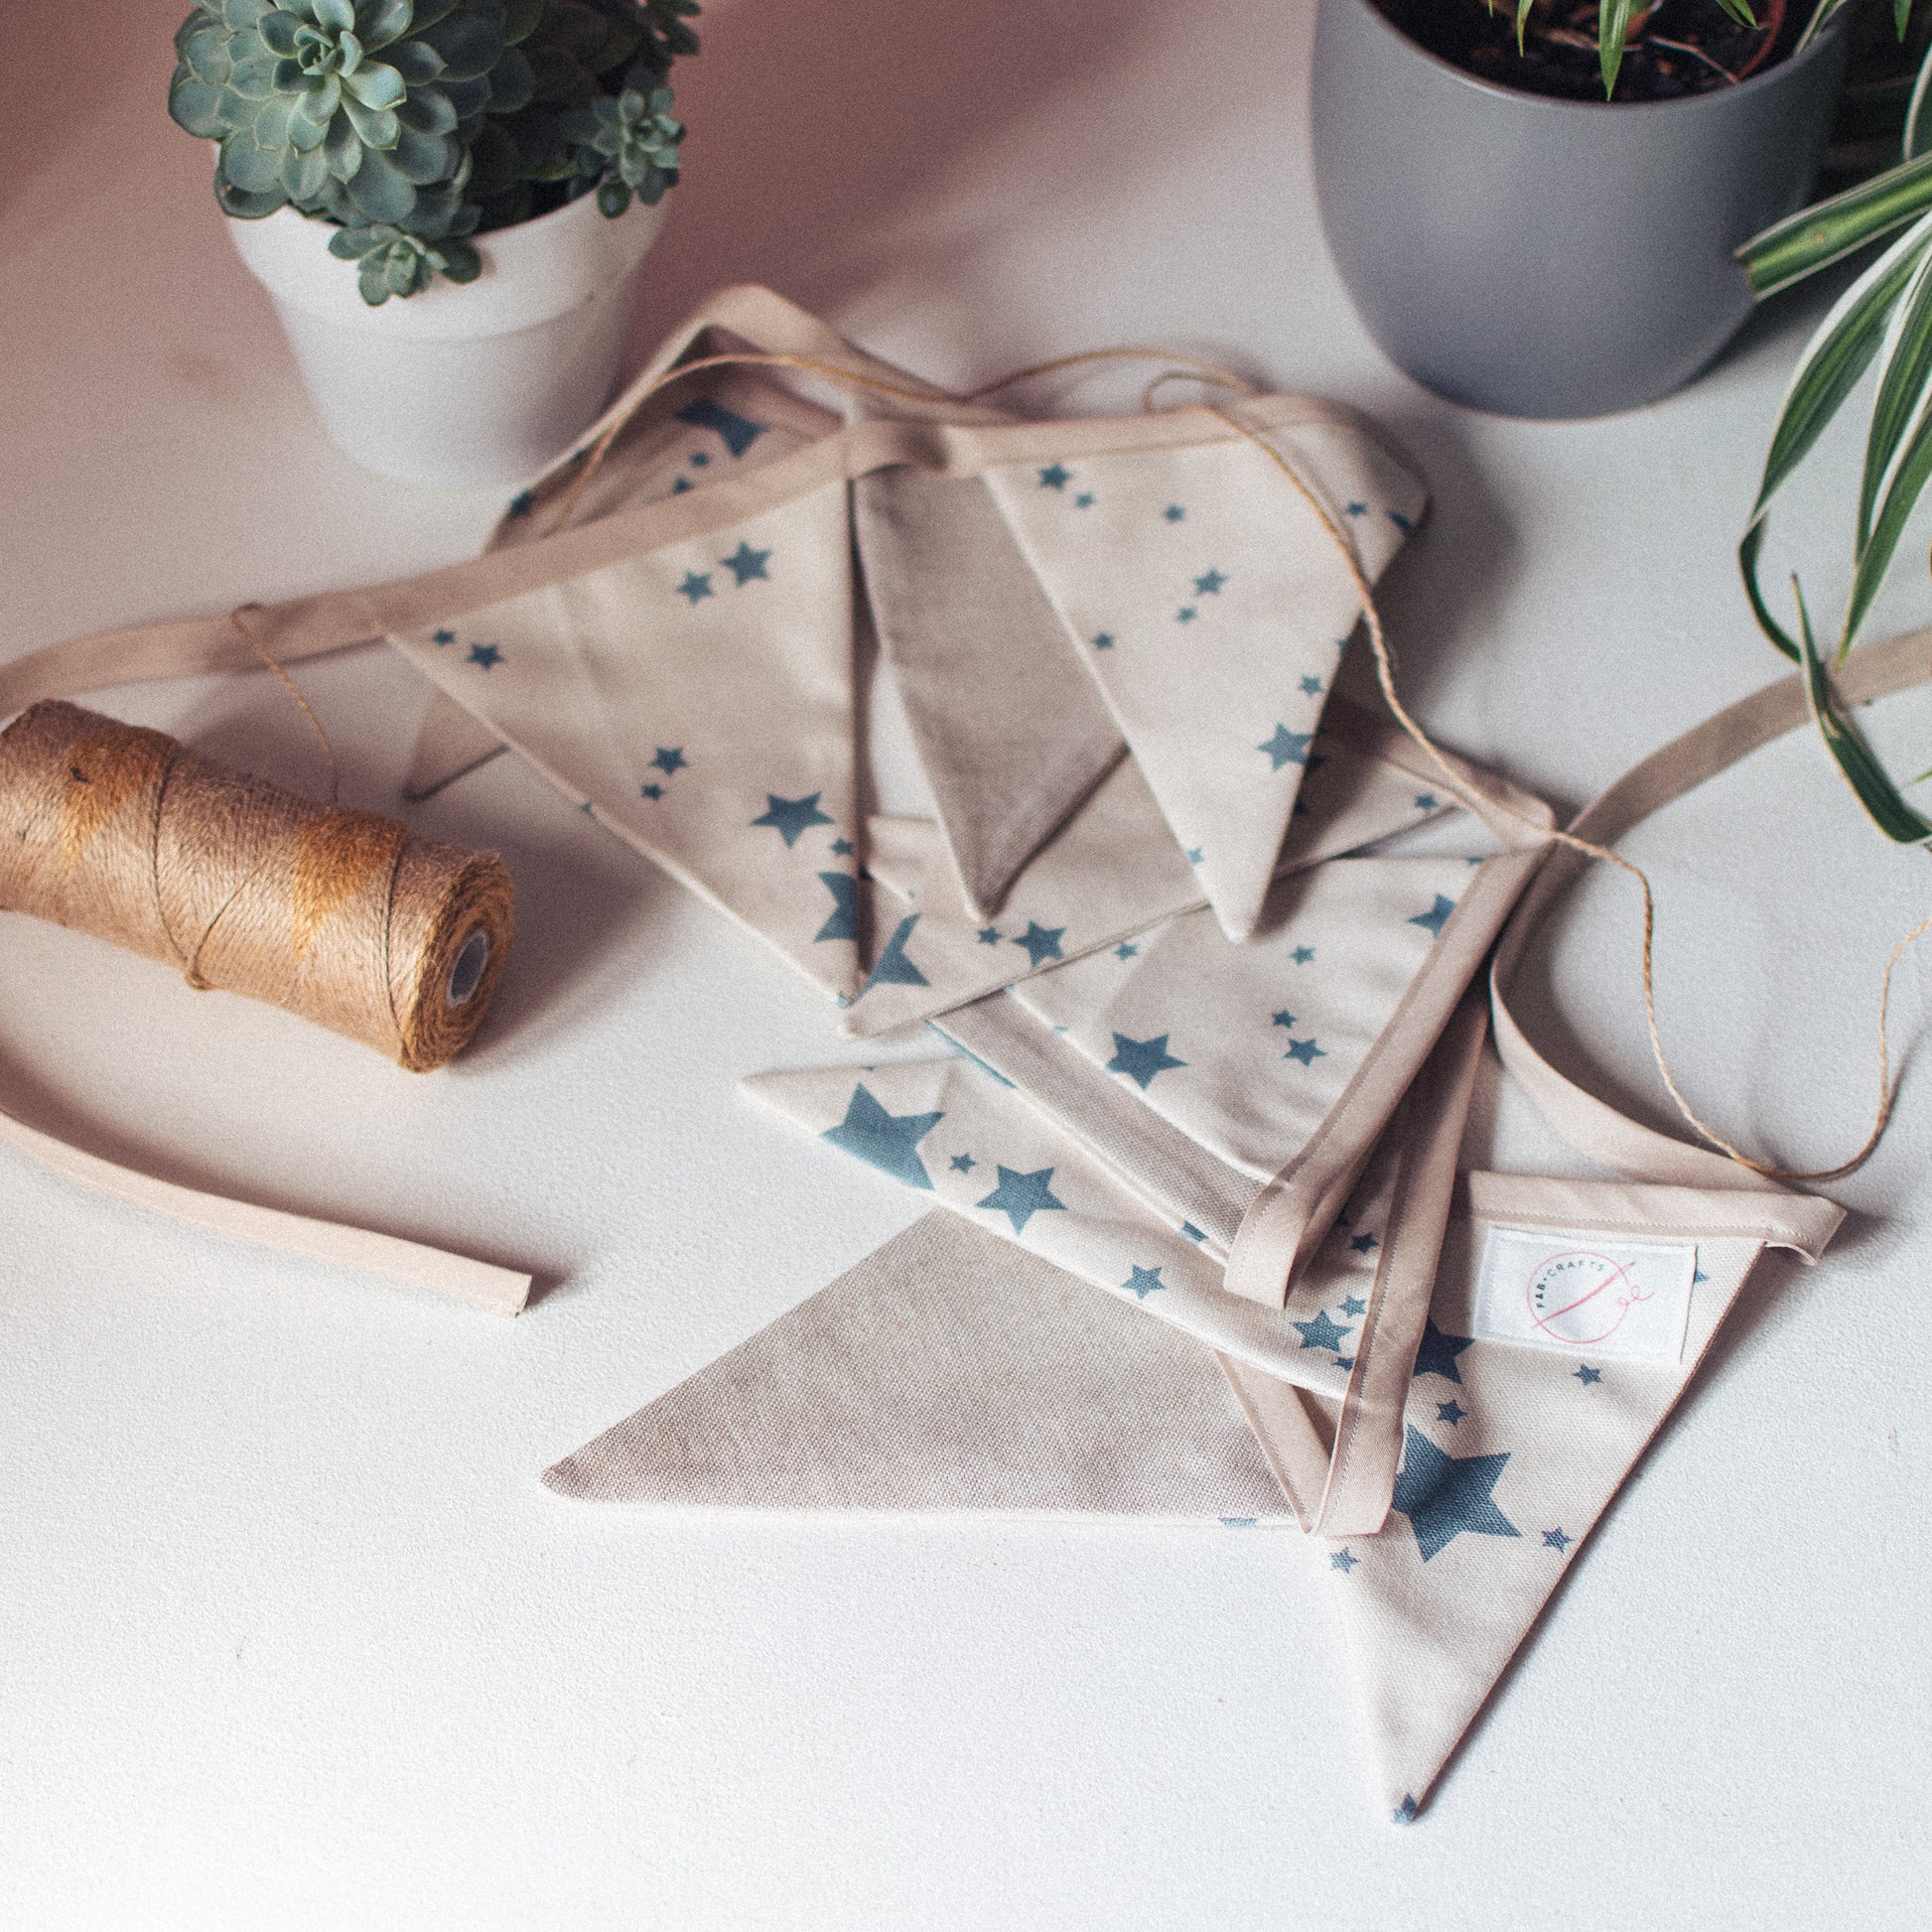 F&B Crafts Blue Star Linen Cotton Bunting - Nursery and Bedroom Decor Handmade In Yorkshire